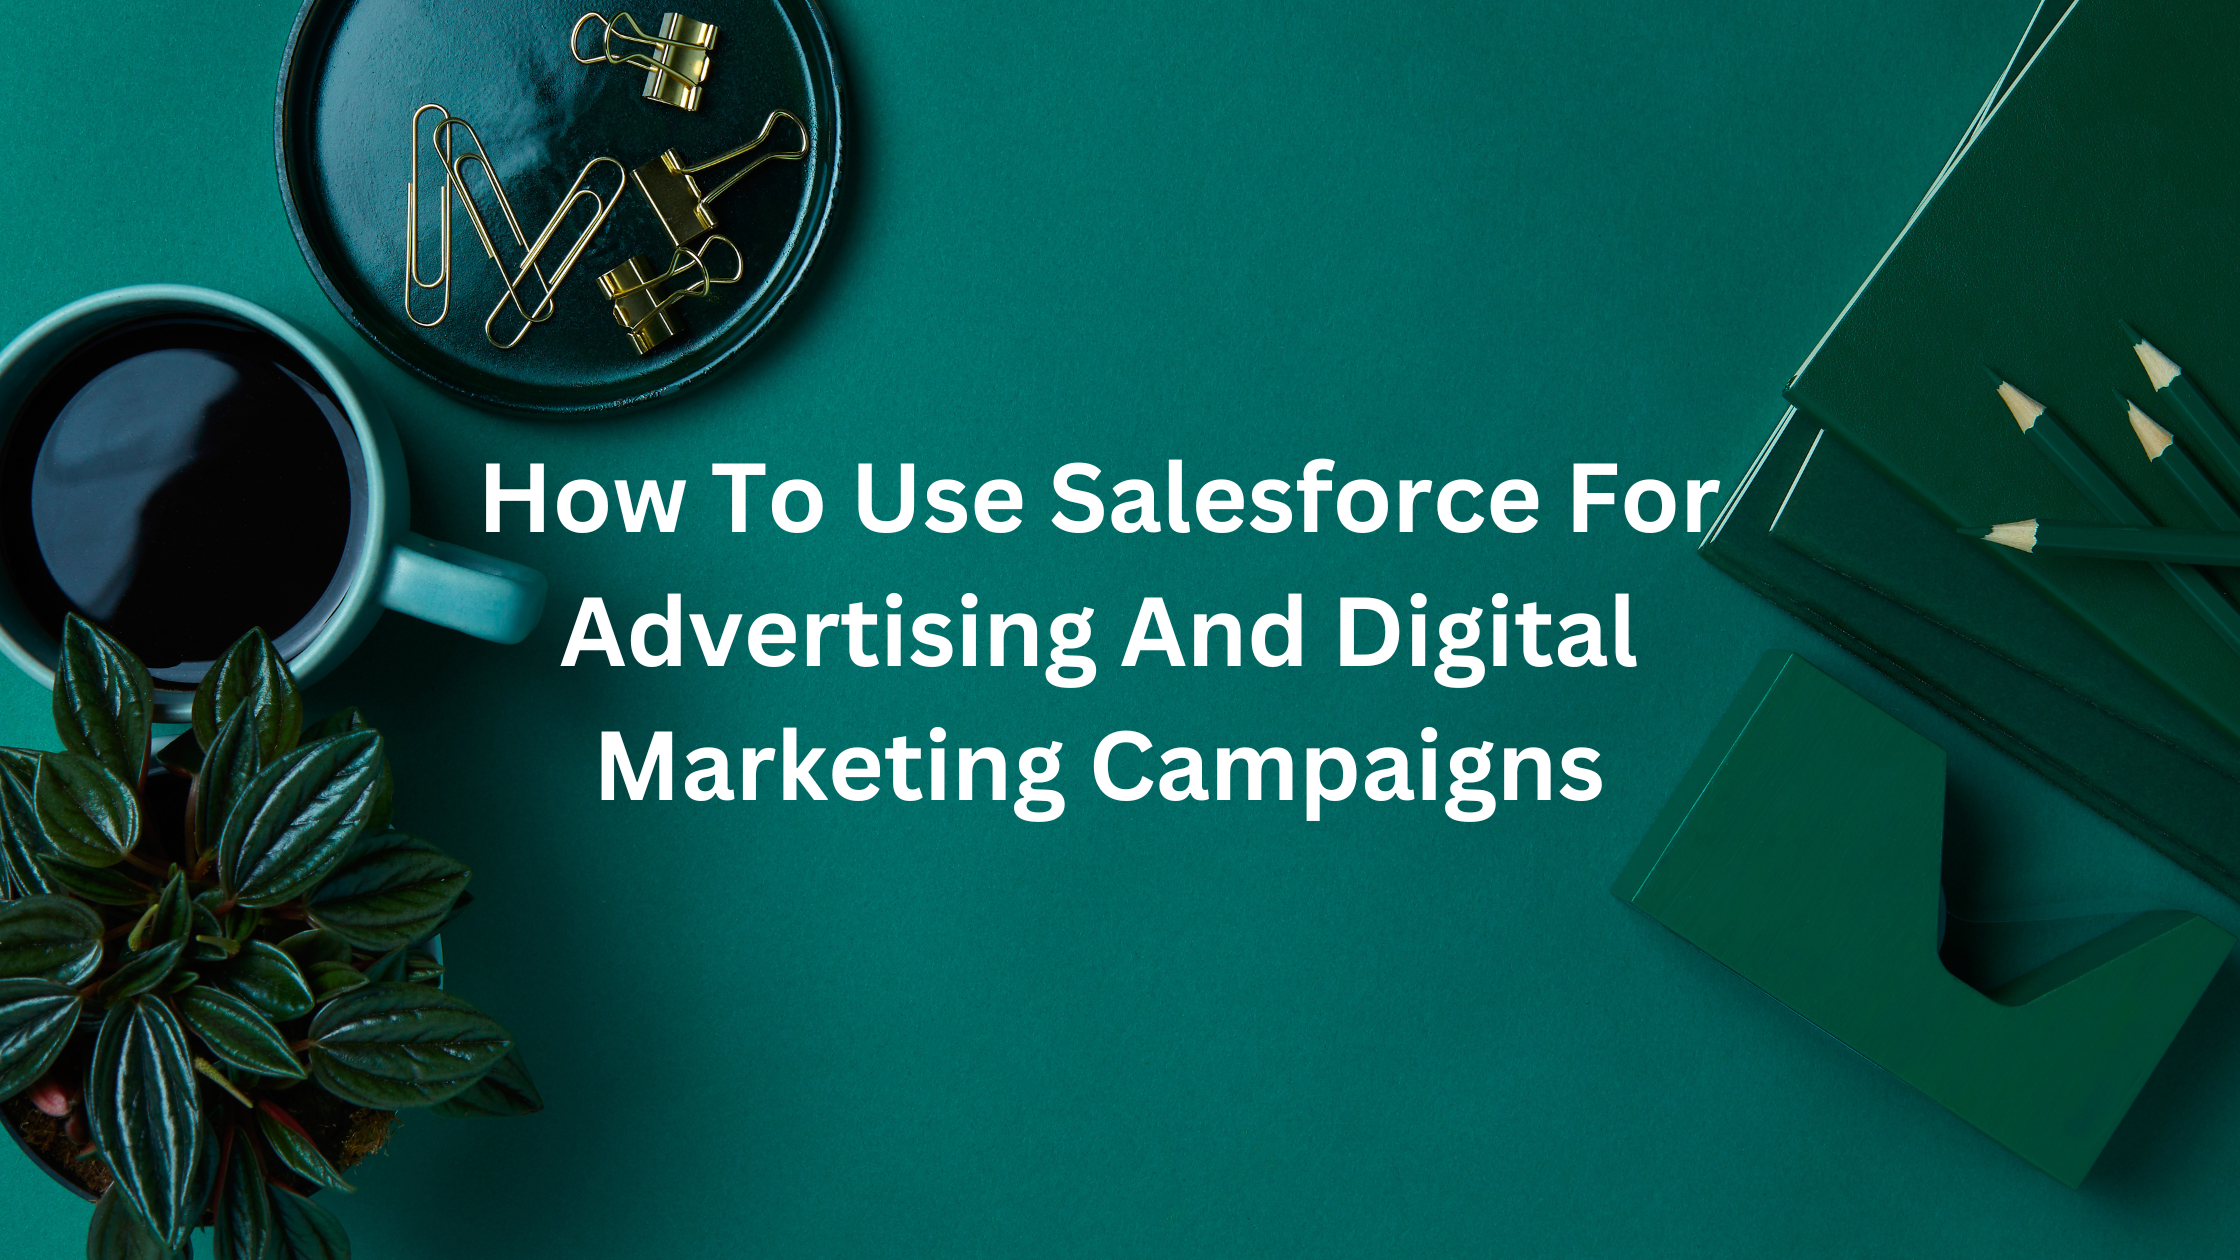 How To Use Salesforce For Advertising and Digital Marketing Campaigns